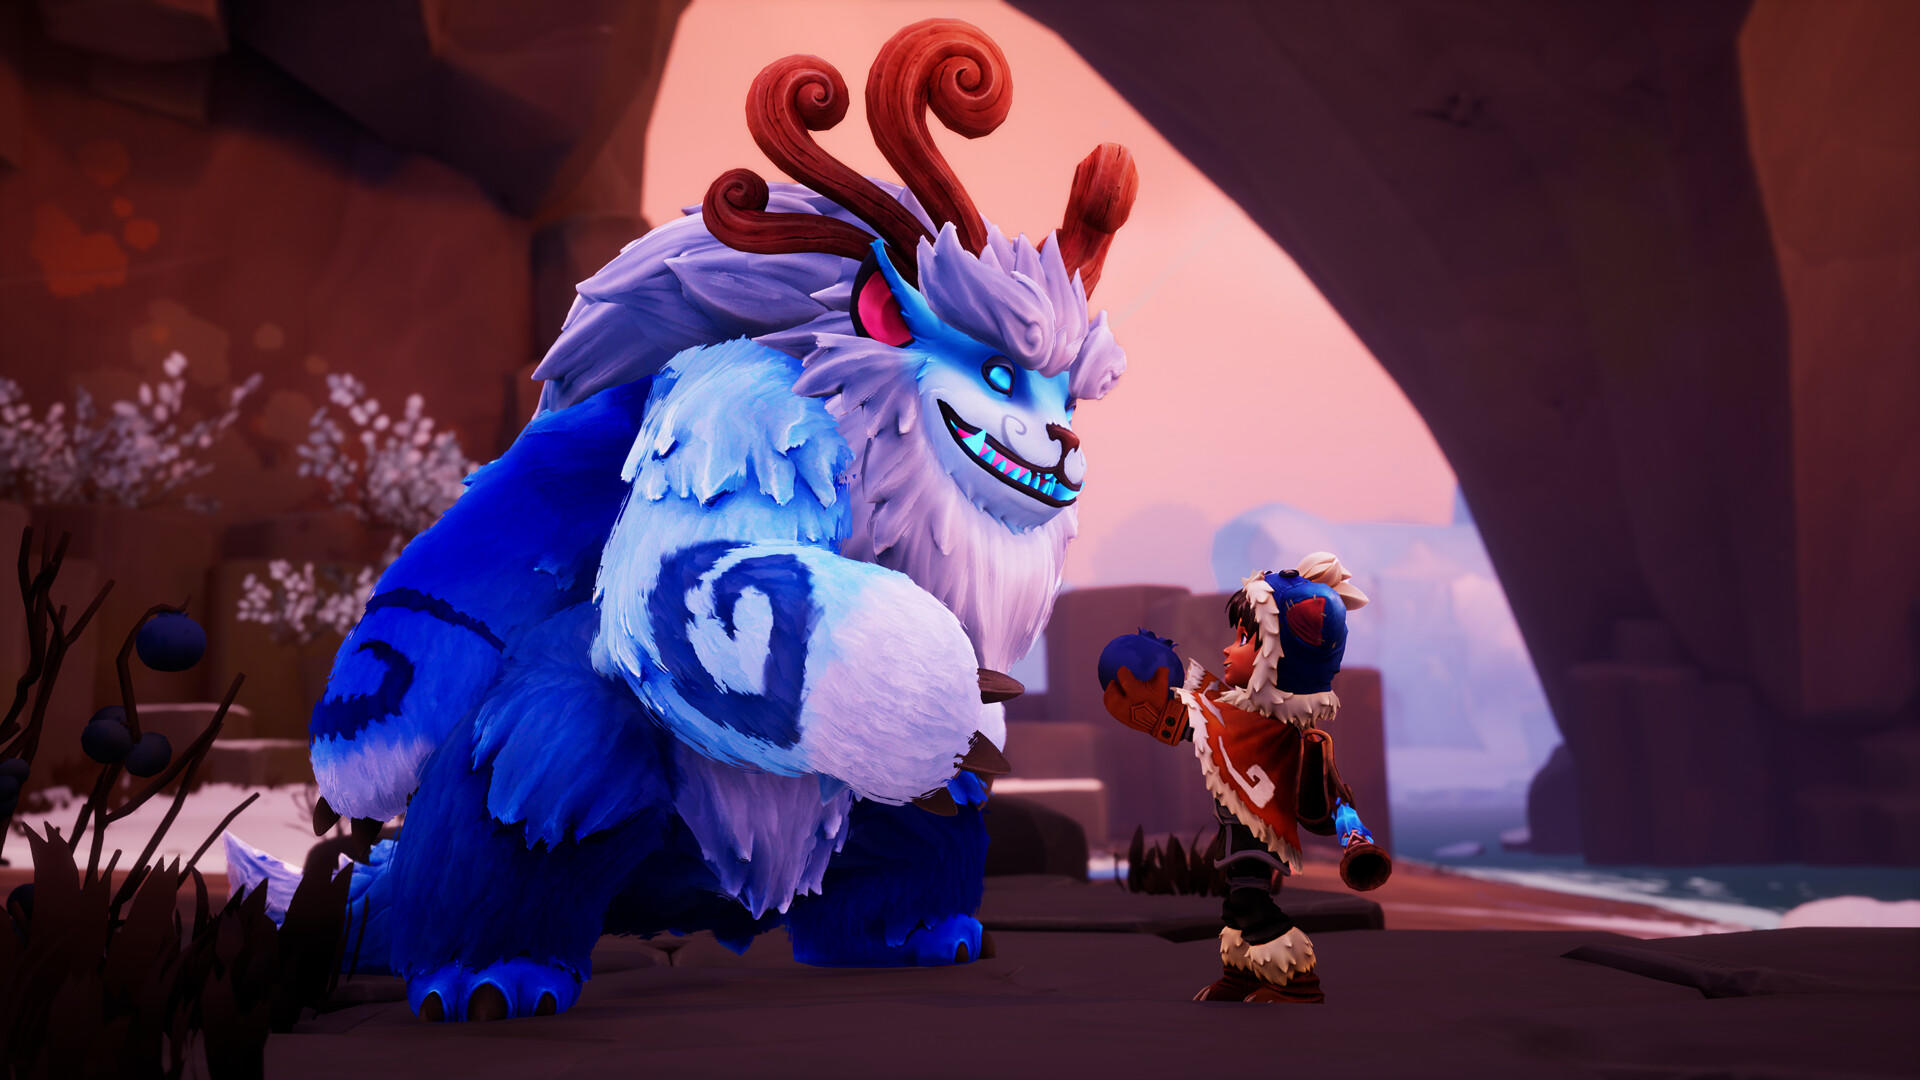 League of Legends’ Nunu and his yeti friend Willump get the spotlight in this adorable adventure